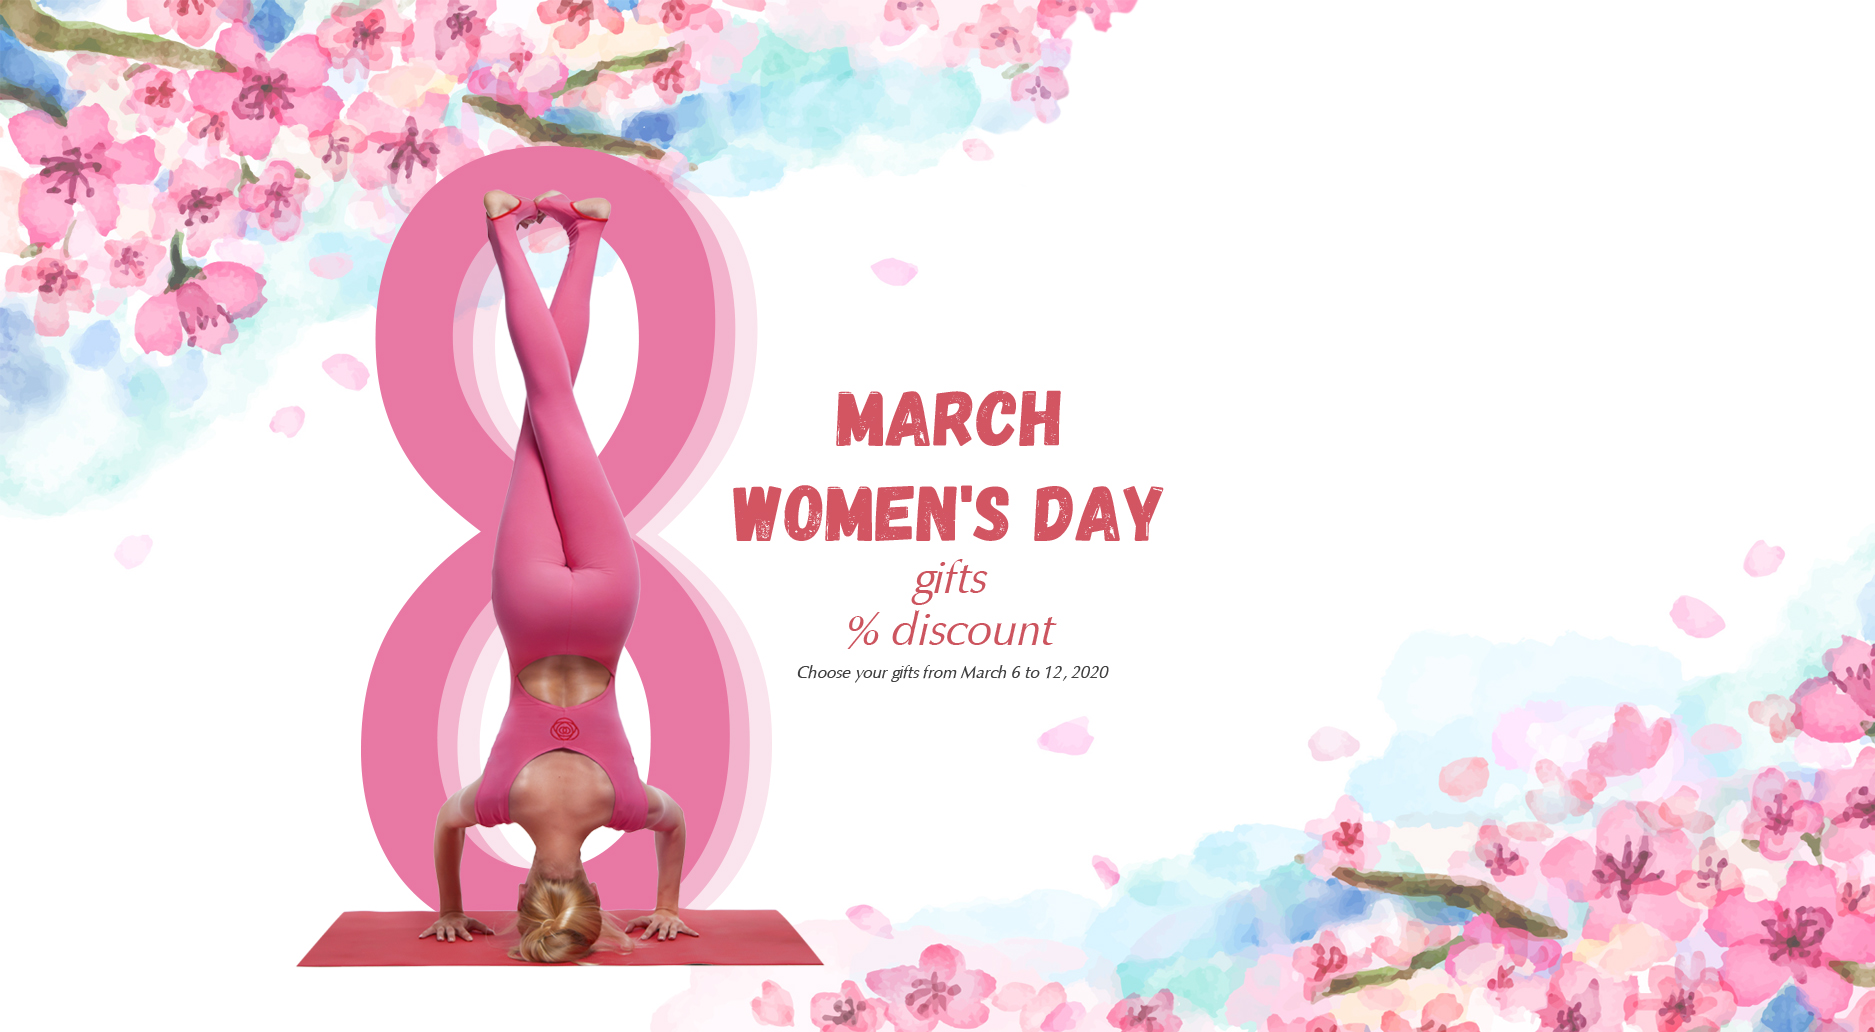 8 March Women's Day, 8  gifts, 8% discount